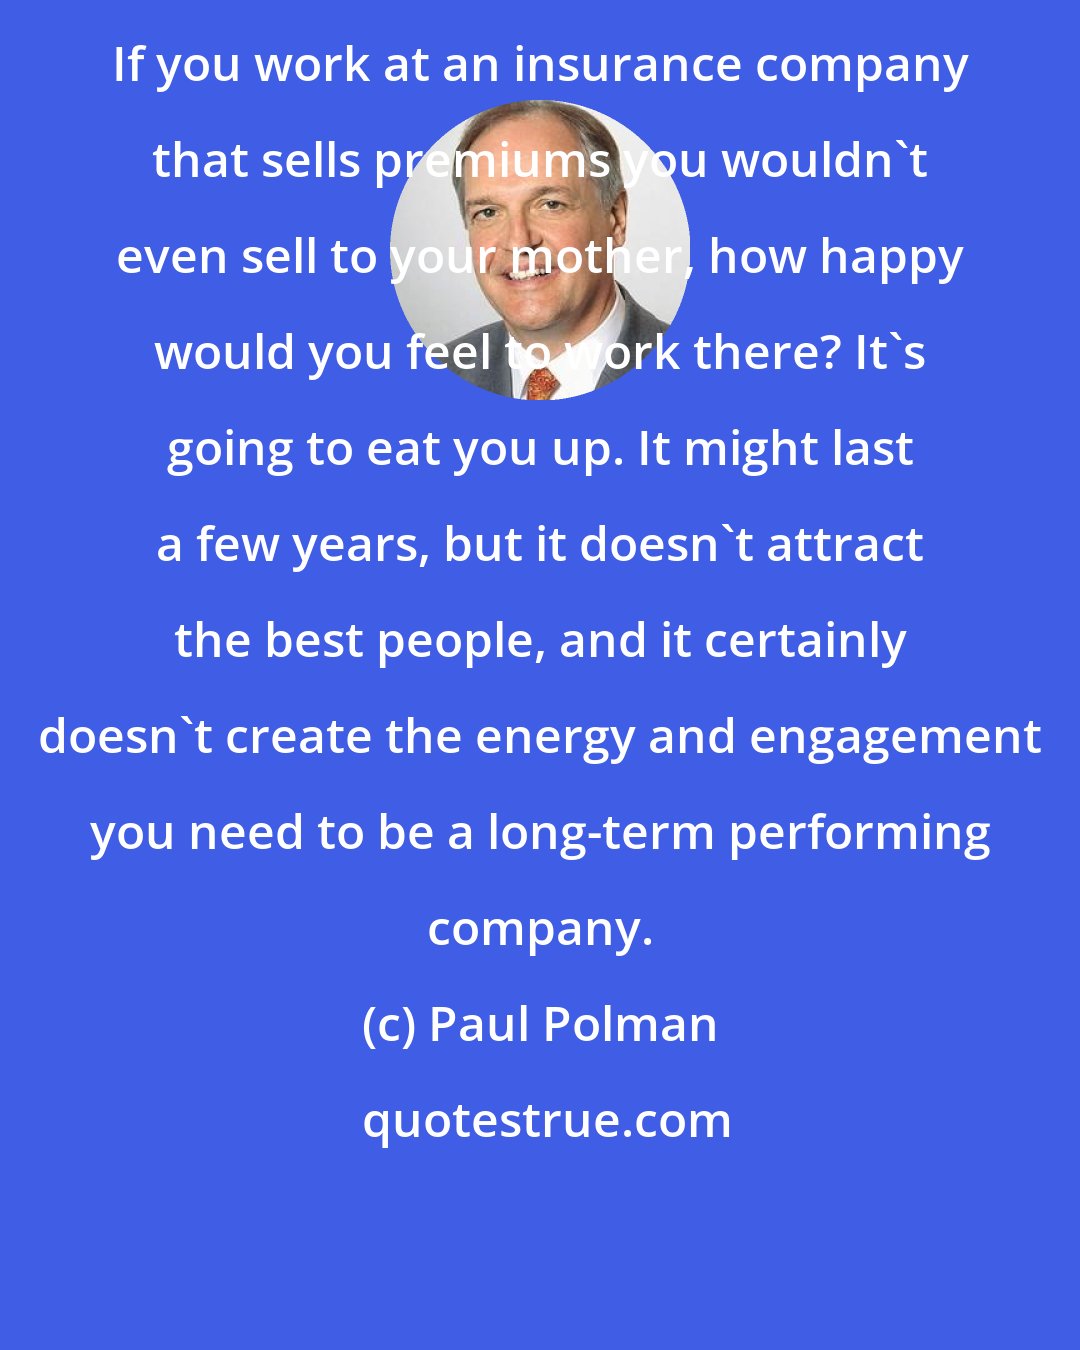 Paul Polman: If you work at an insurance company that sells premiums you wouldn't even sell to your mother, how happy would you feel to work there? It's going to eat you up. It might last a few years, but it doesn't attract the best people, and it certainly doesn't create the energy and engagement you need to be a long-term performing company.